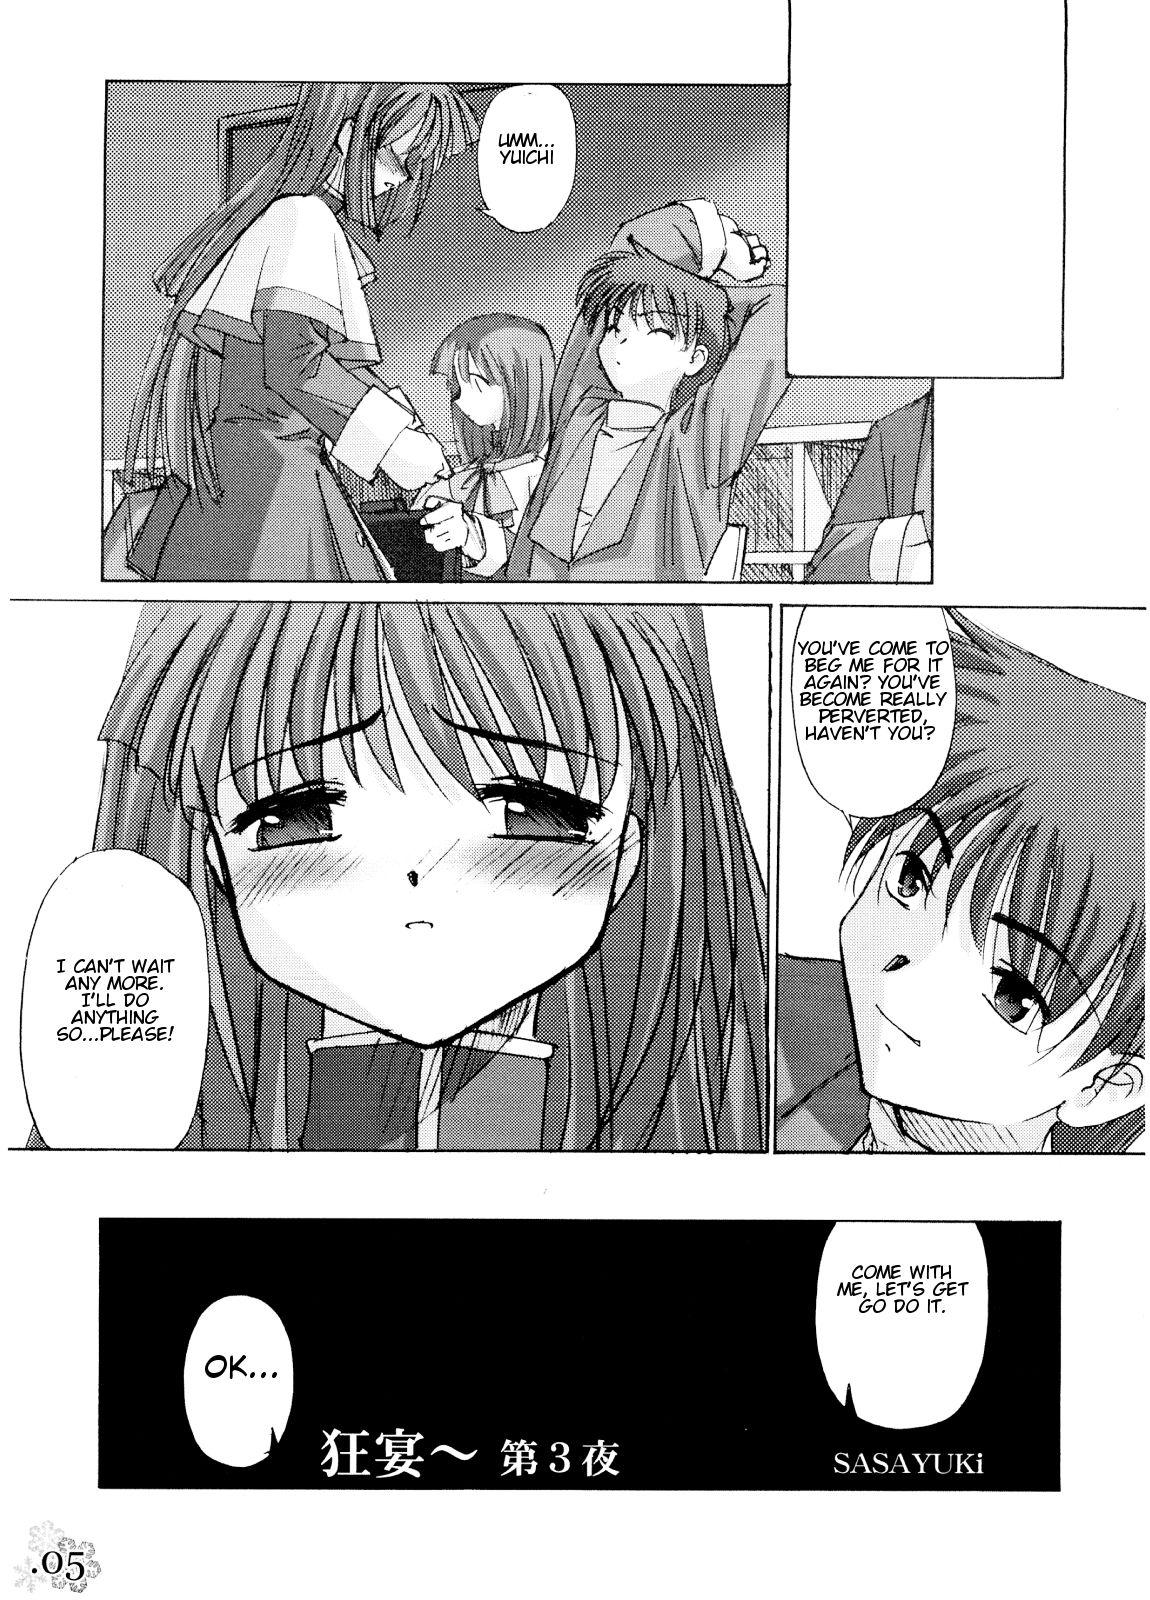 You Are The Only Version: Kanon Part 2 1